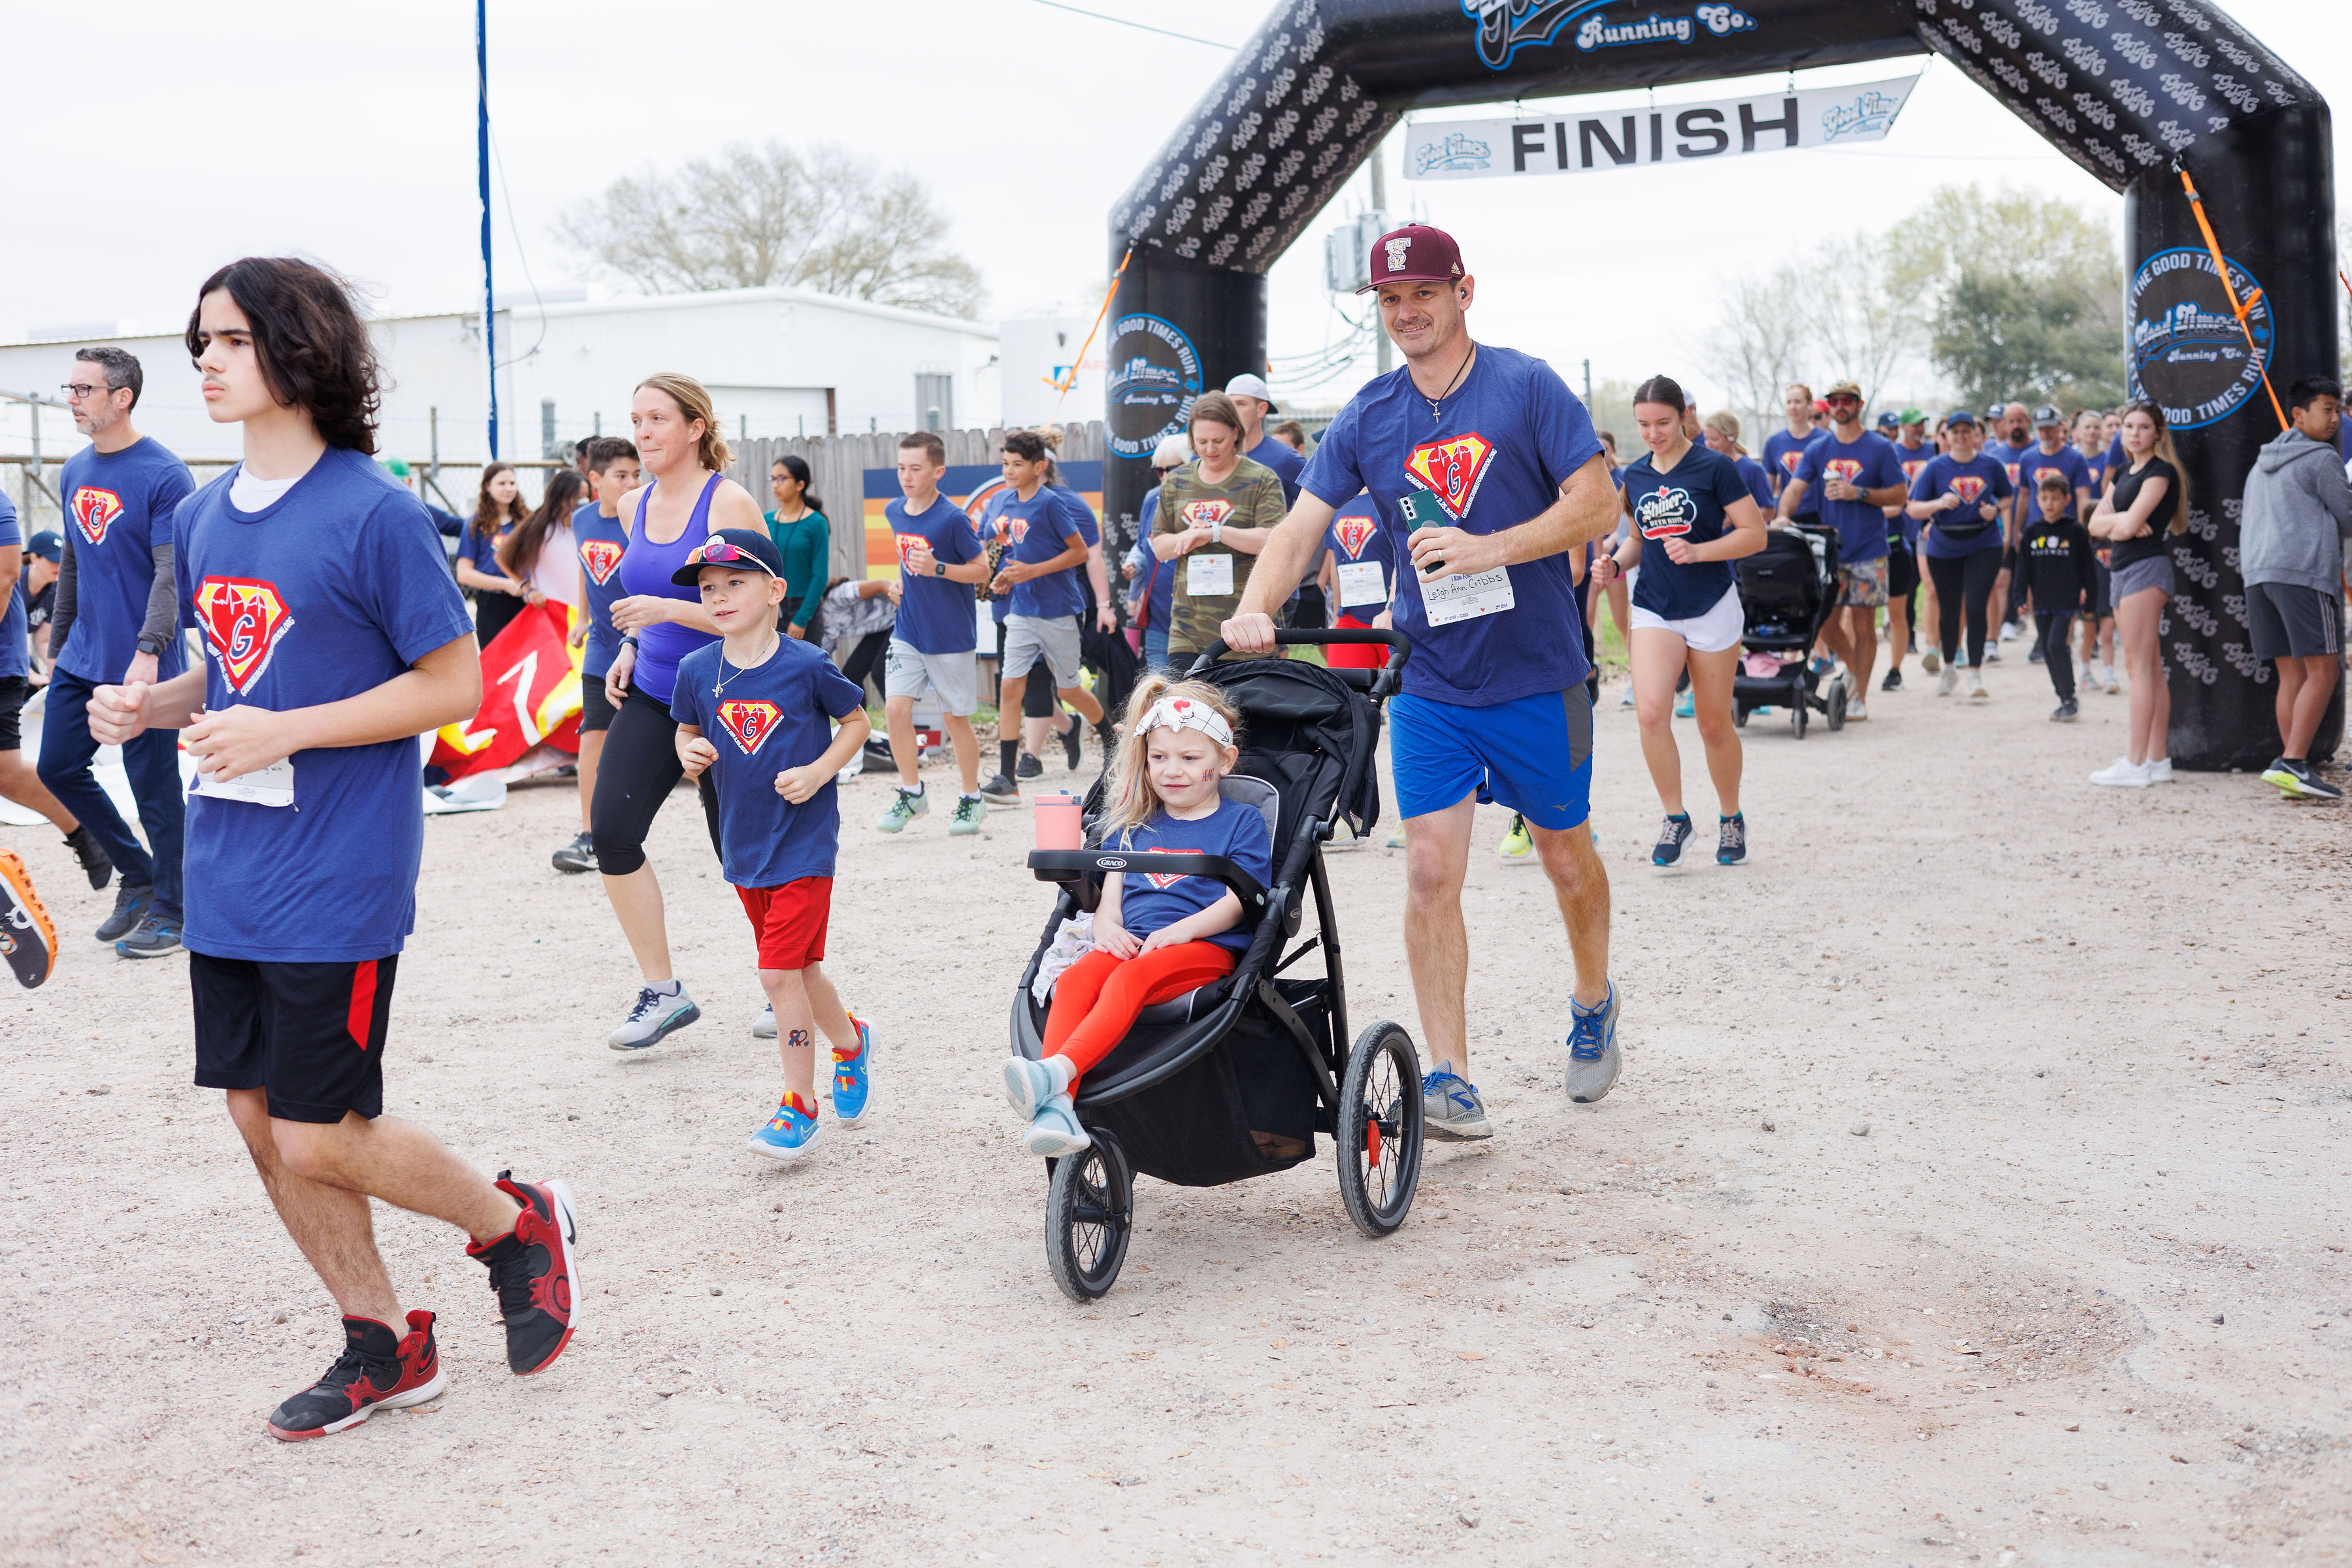 Katy Family to Honor Late Son with Annual Fun Run Benefitting Congenital Heart Defect Research